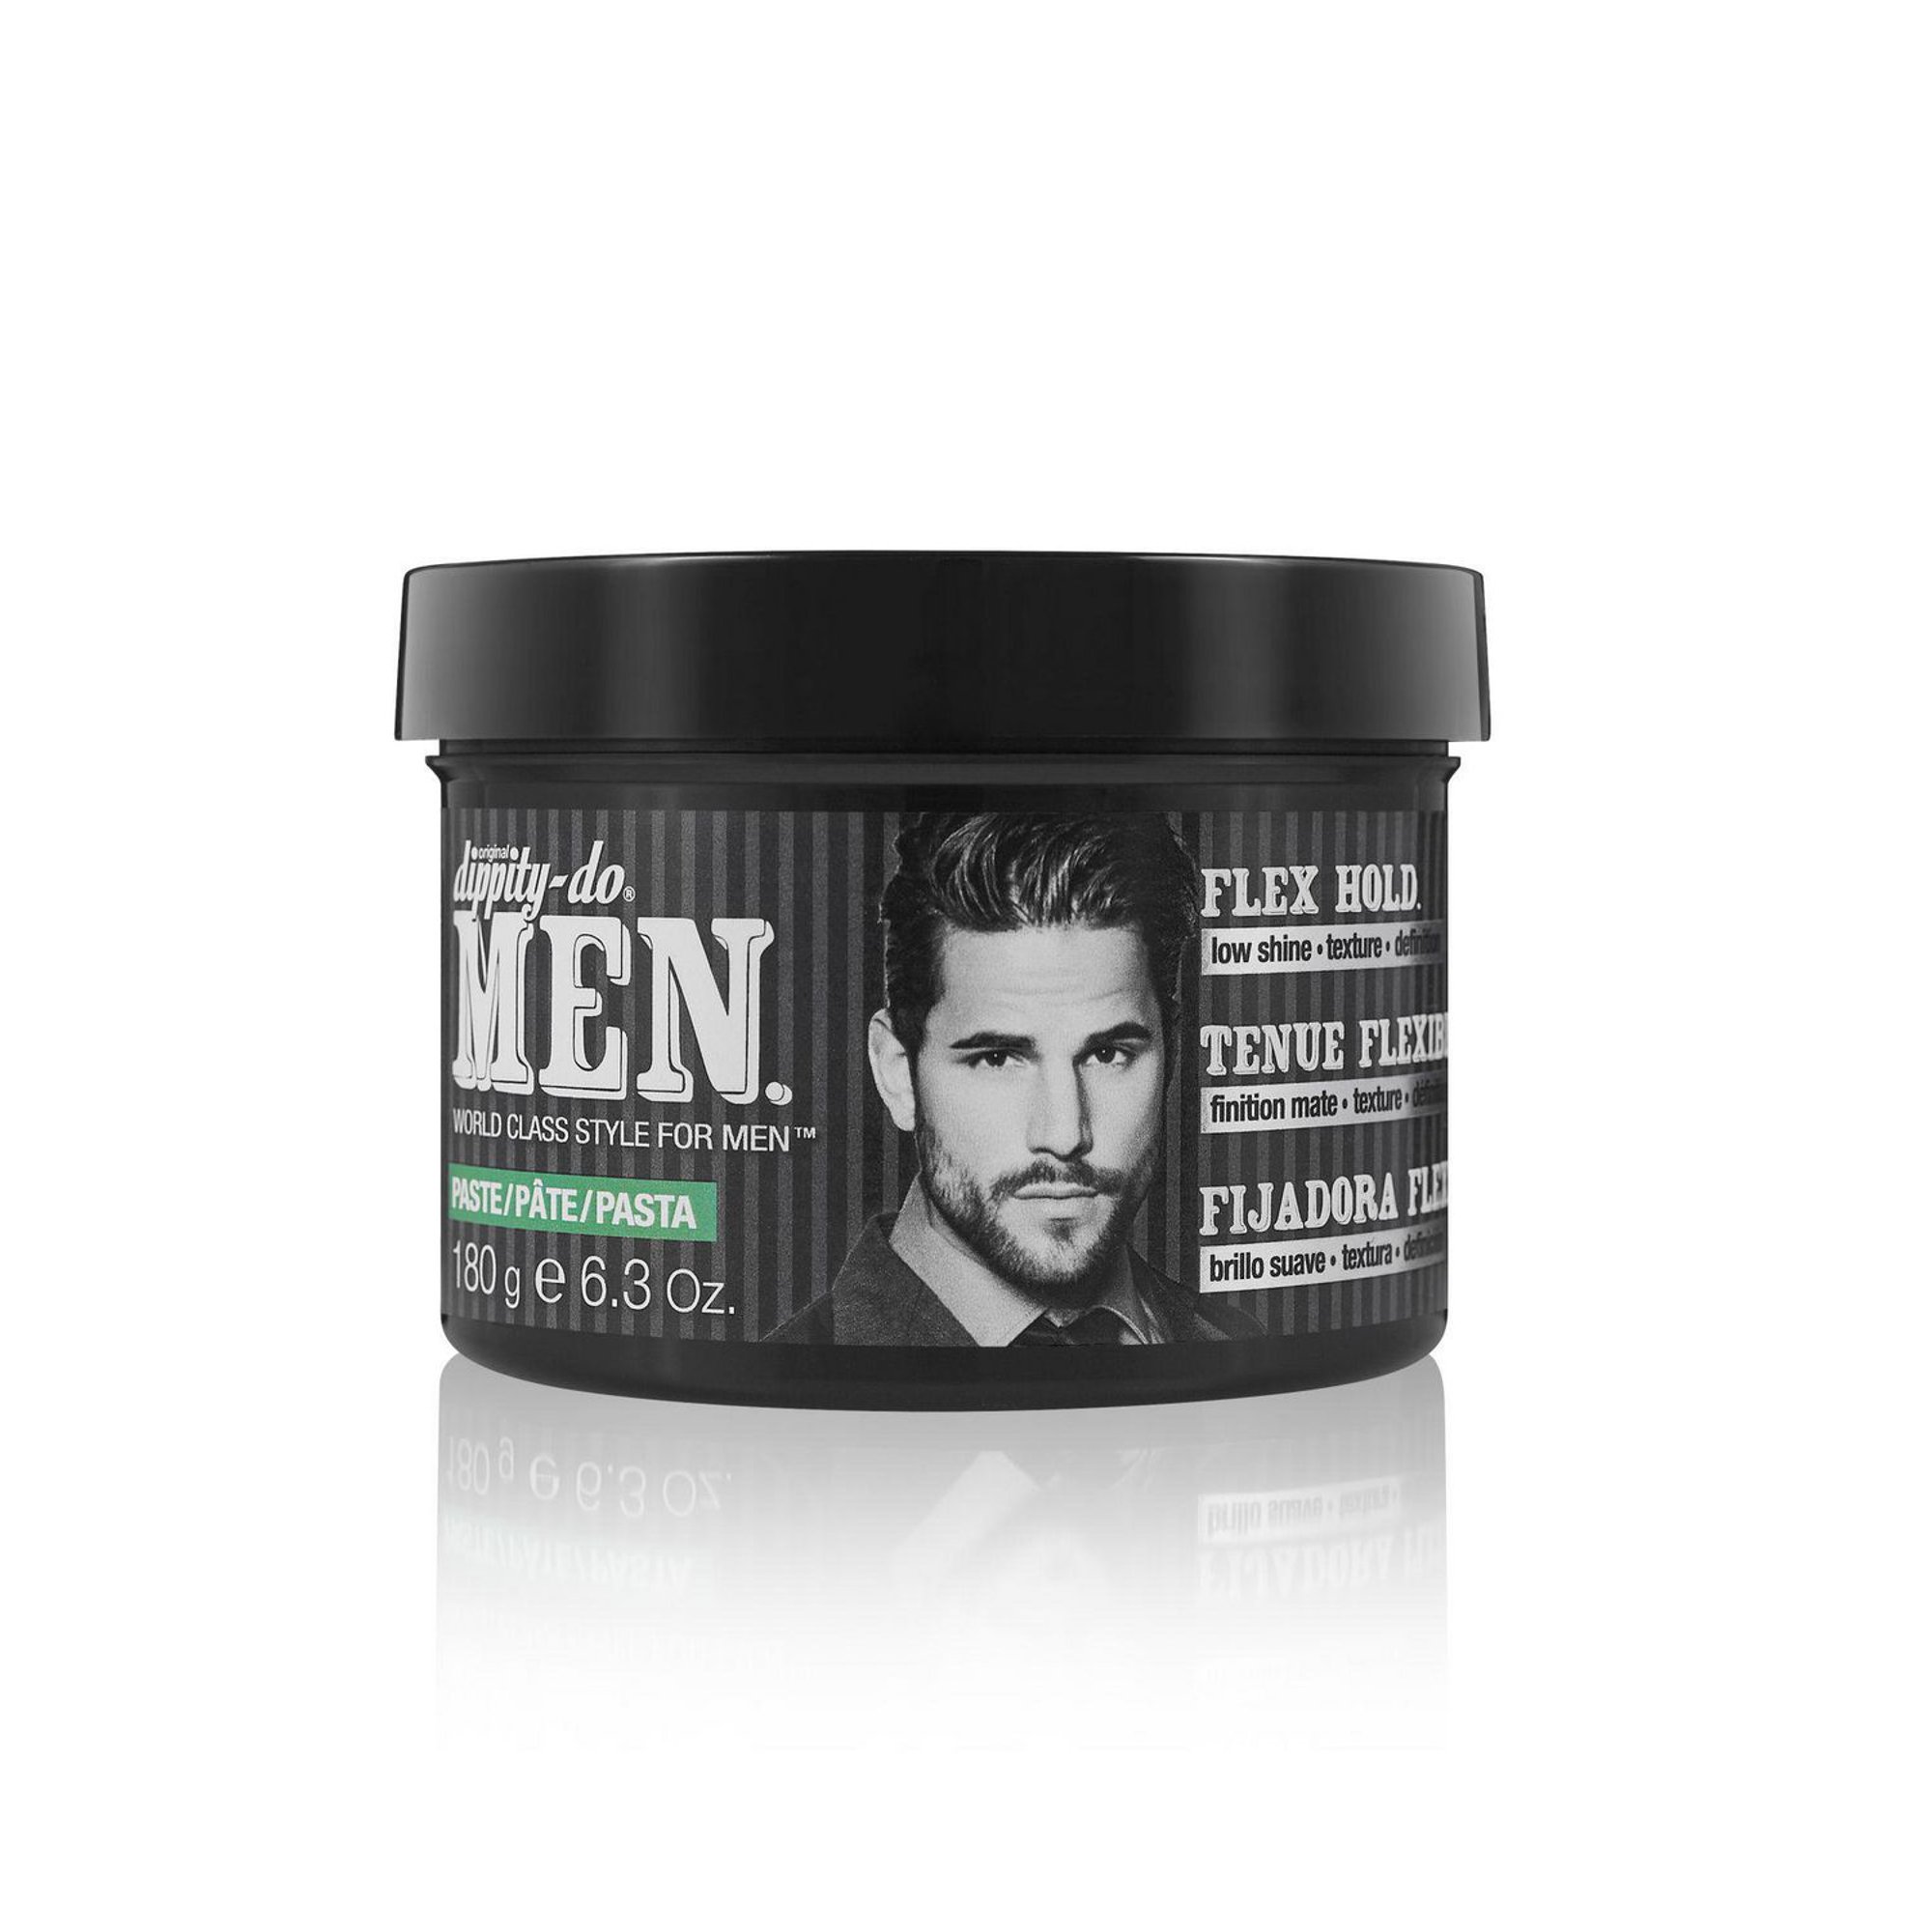 dippity-do MEN Texture Paste Flexibility and staying power for short to  mid-length styles with natural grooming ingredients for a relaxed, messy,  carefree feel | Walmart Canada